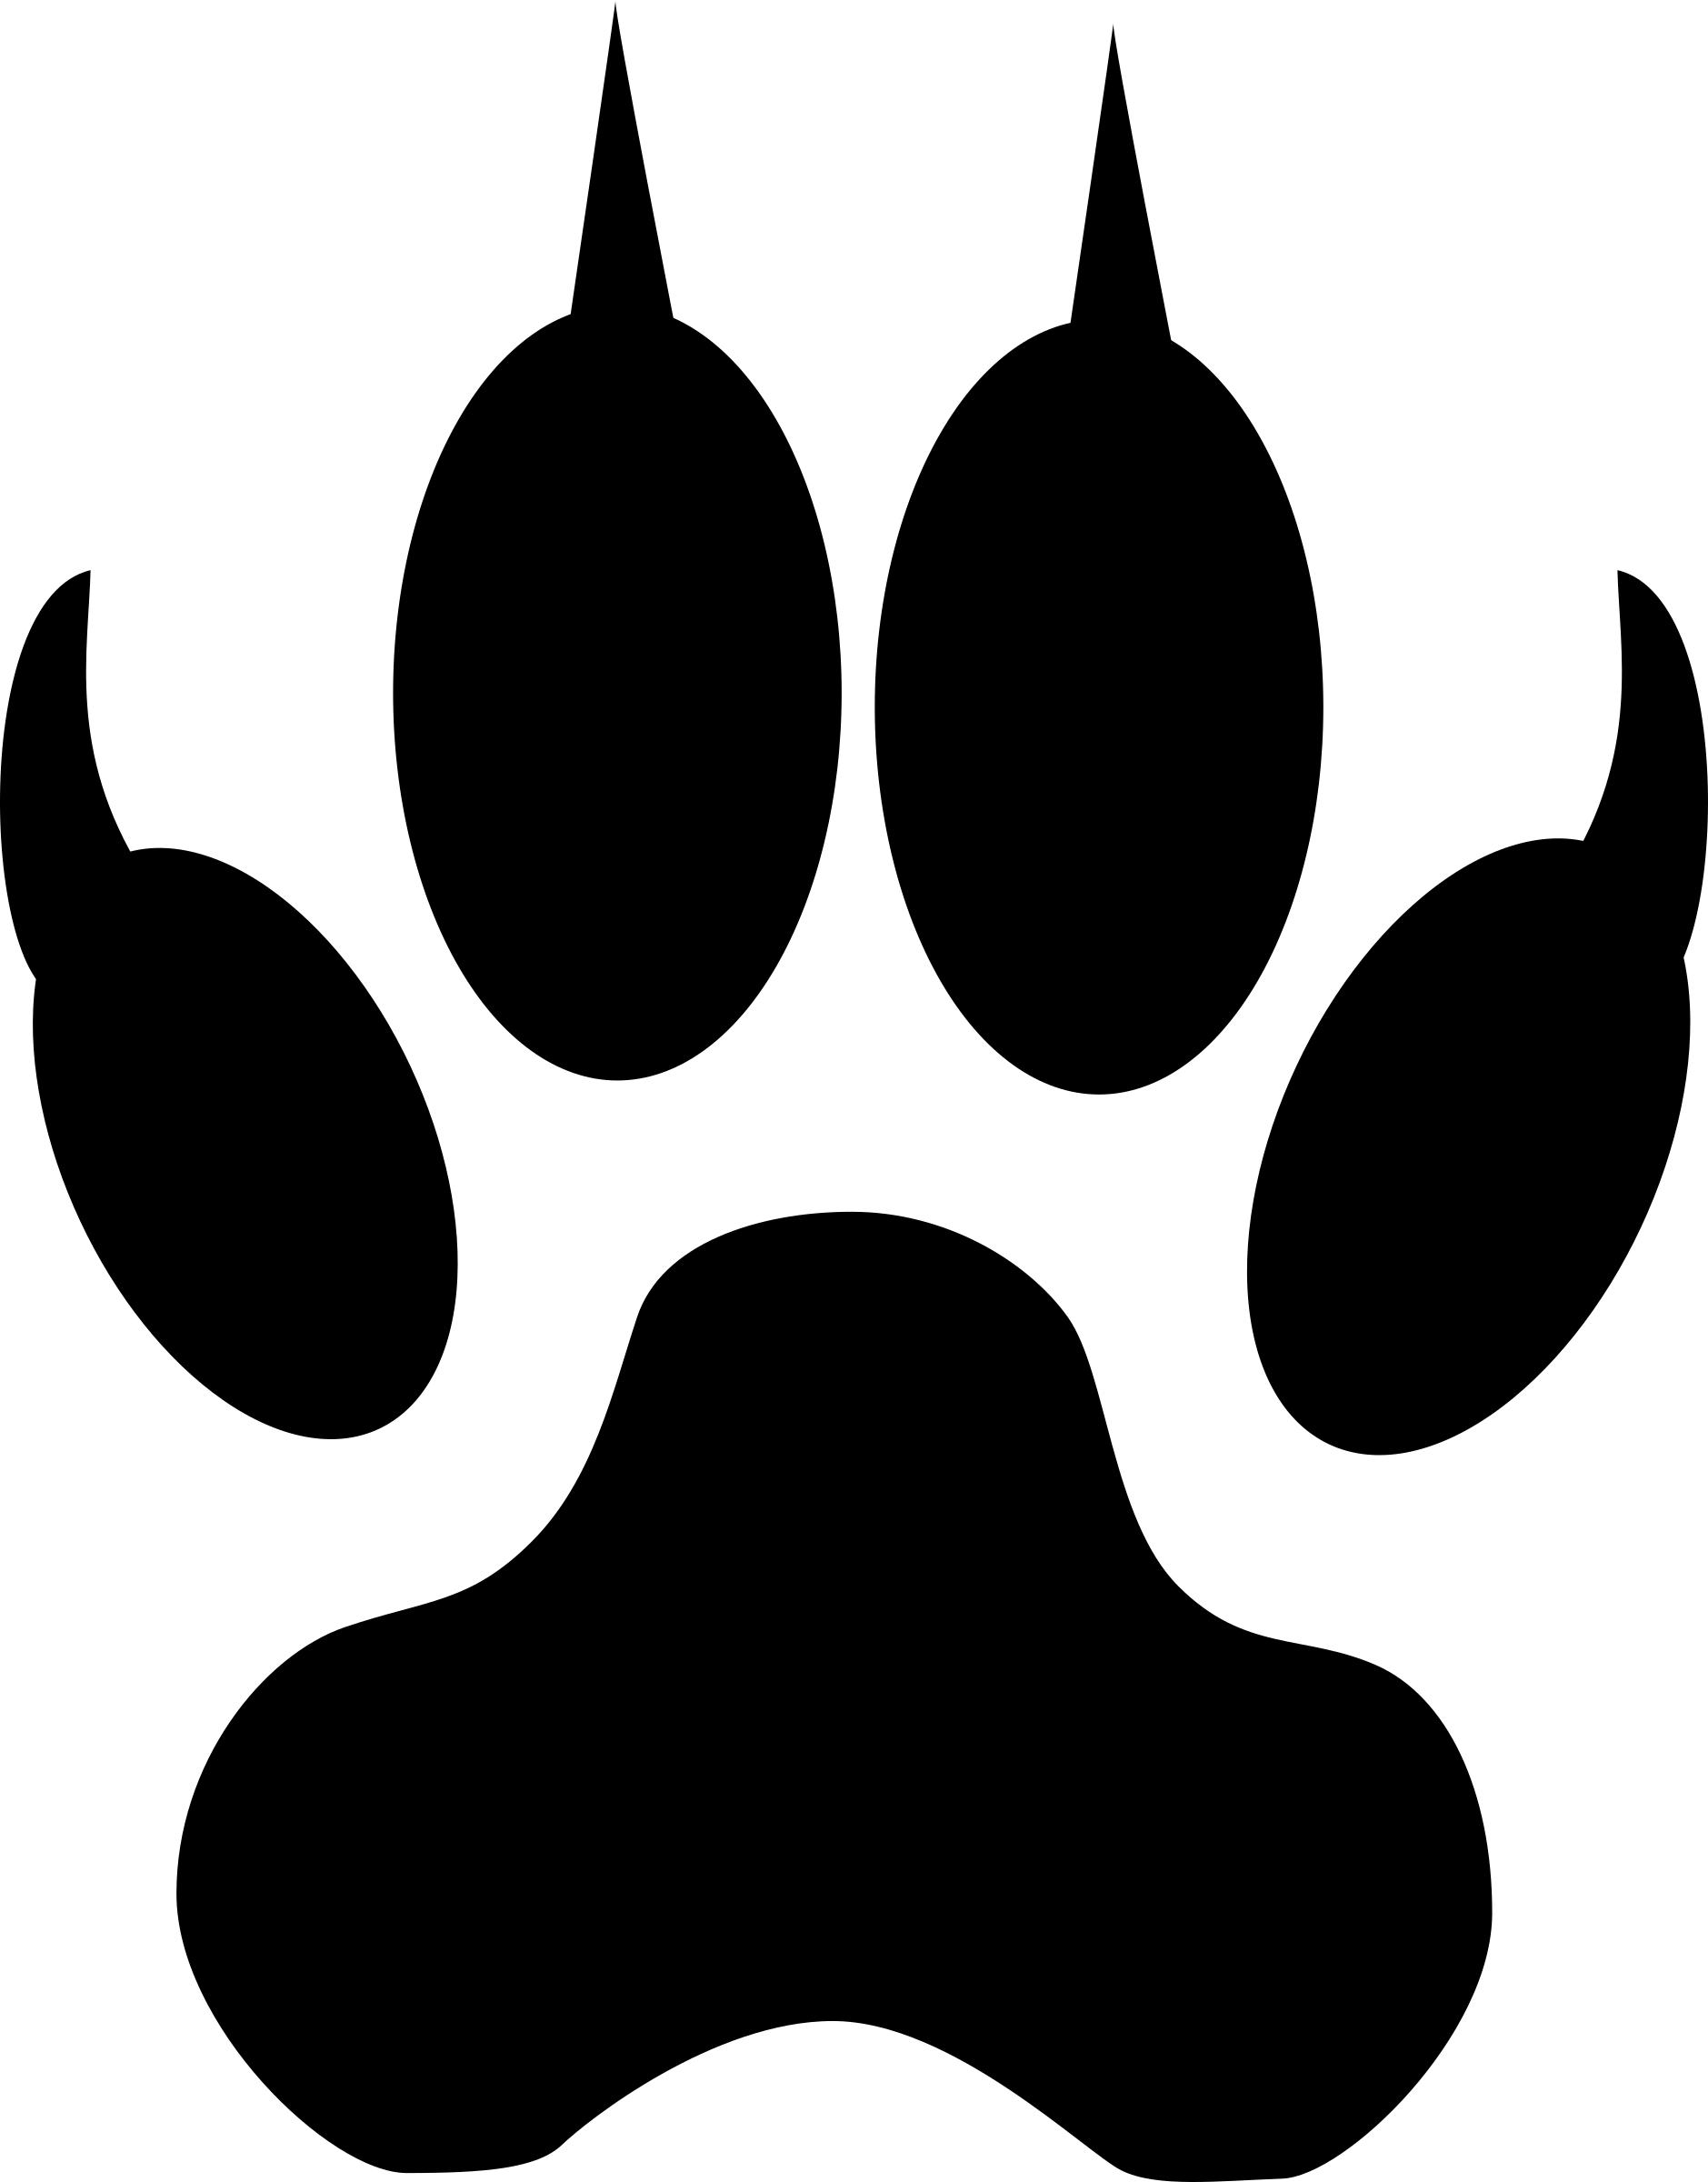 Dog or wolf footstep/track png